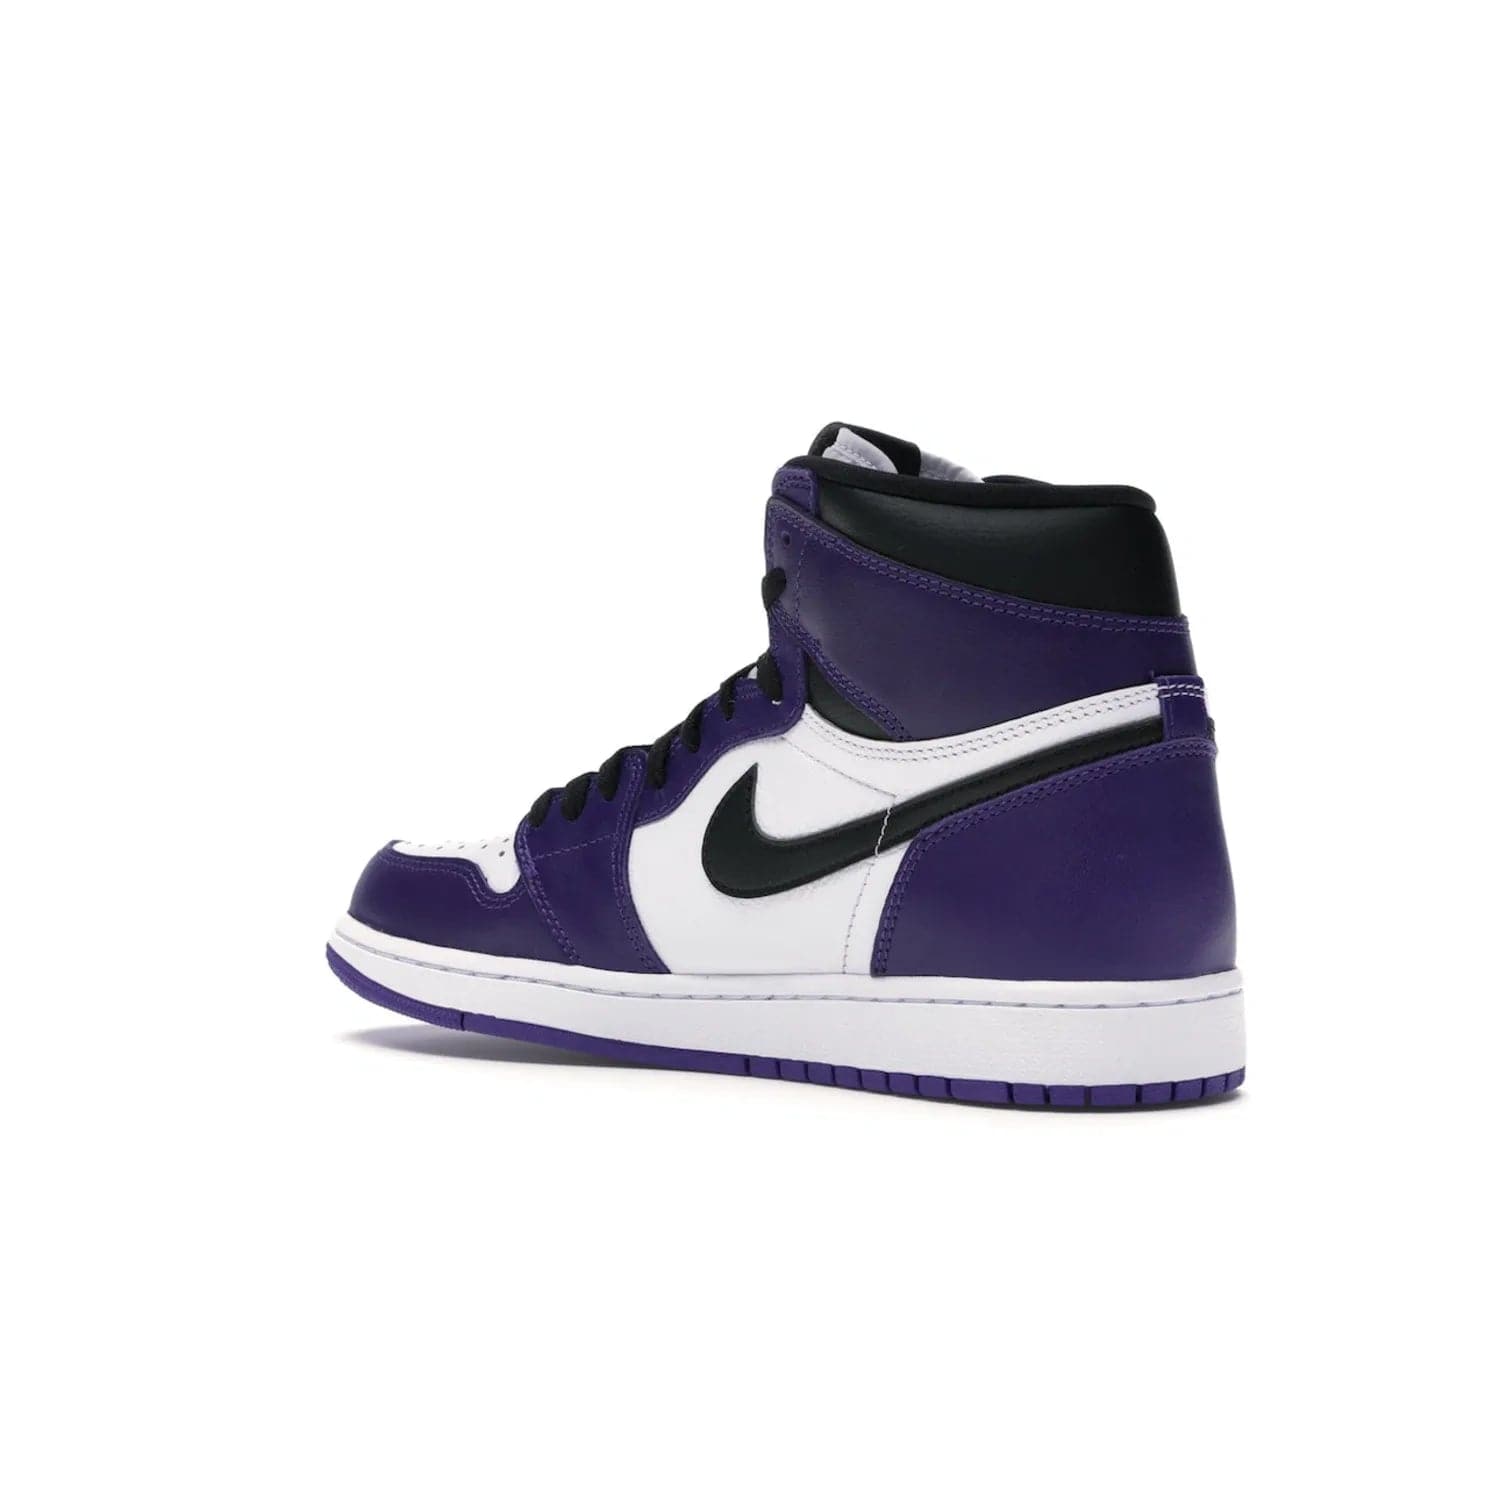 Jordan 1 Retro High Court Purple White - Image 23 - Only at www.BallersClubKickz.com - Grab the classic Jordan 1 Retro High Court Purple White and add major flavor to your collection. White leather upper with Court Purple overlays and Swoosh logo. White midsole and purple outsole. Get yours and rep your Jordan Brand.